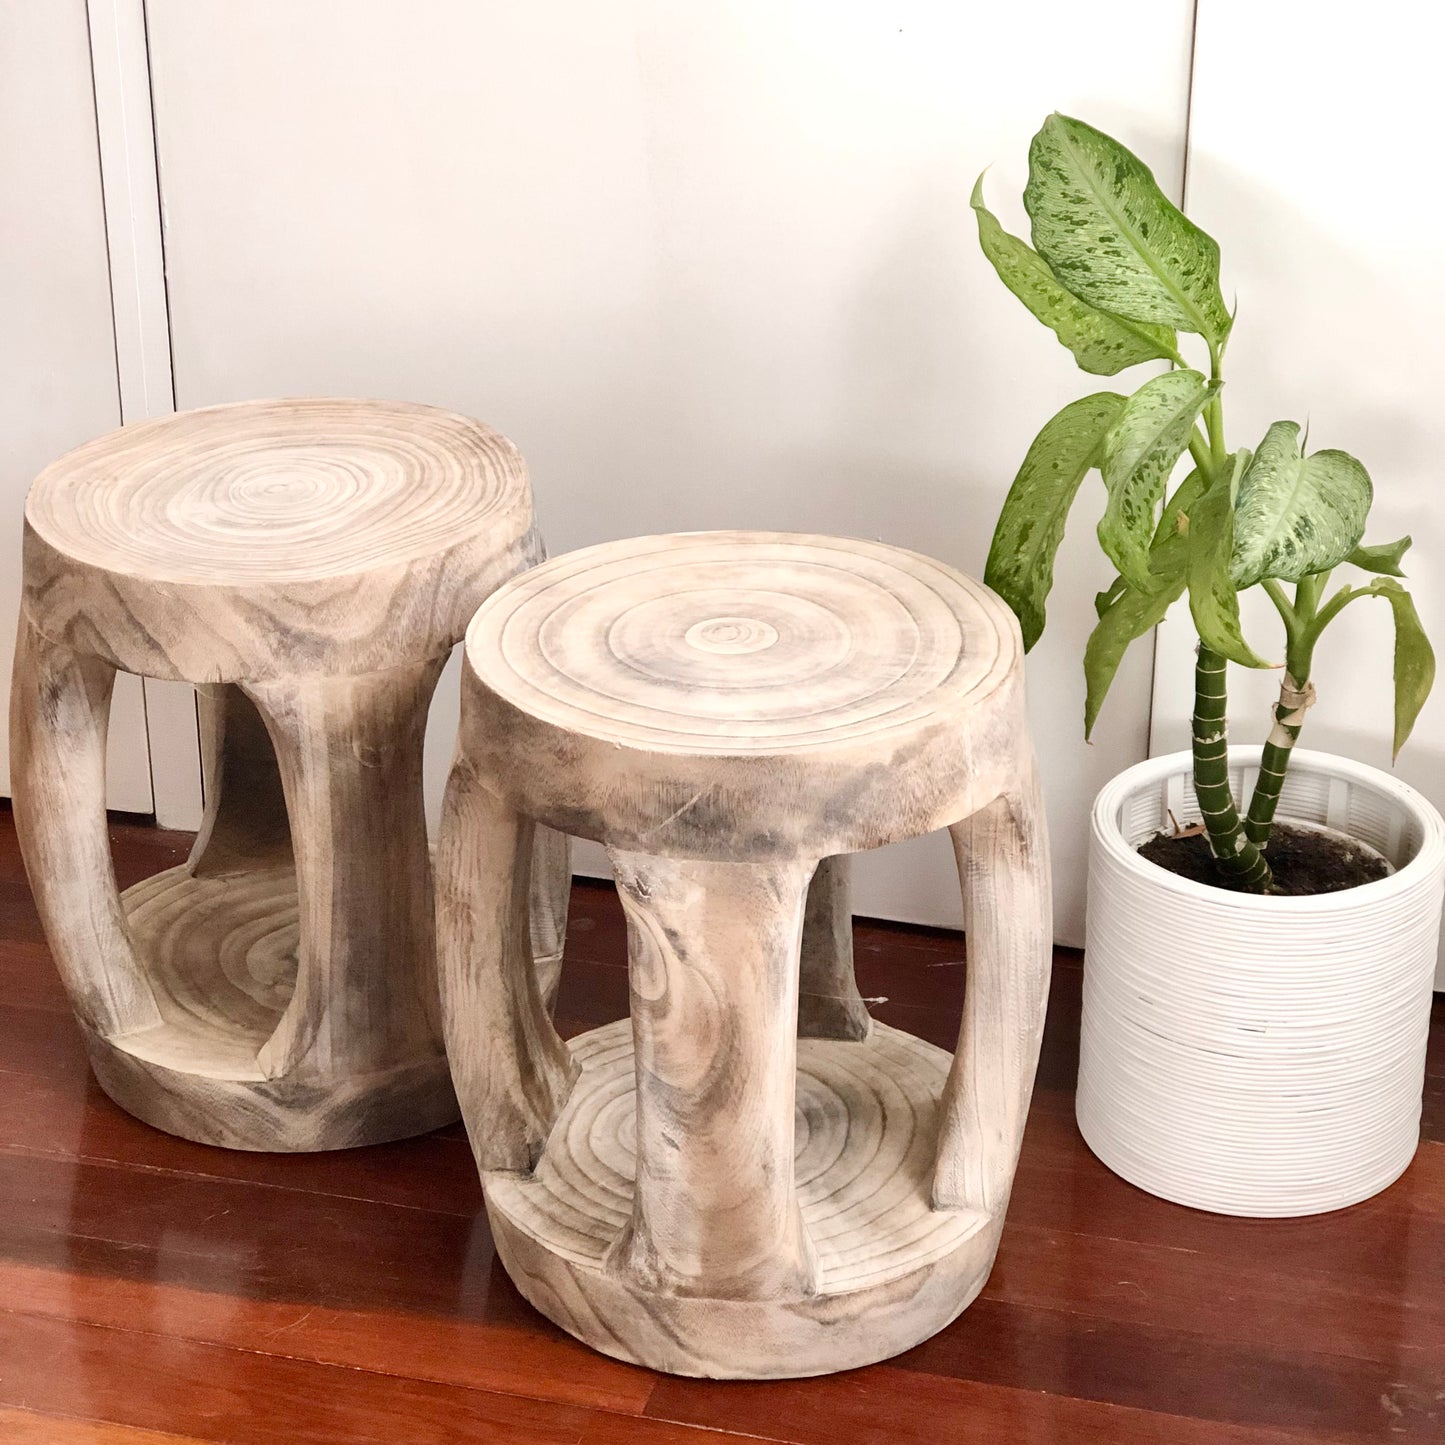 White wash wooden stool / side table